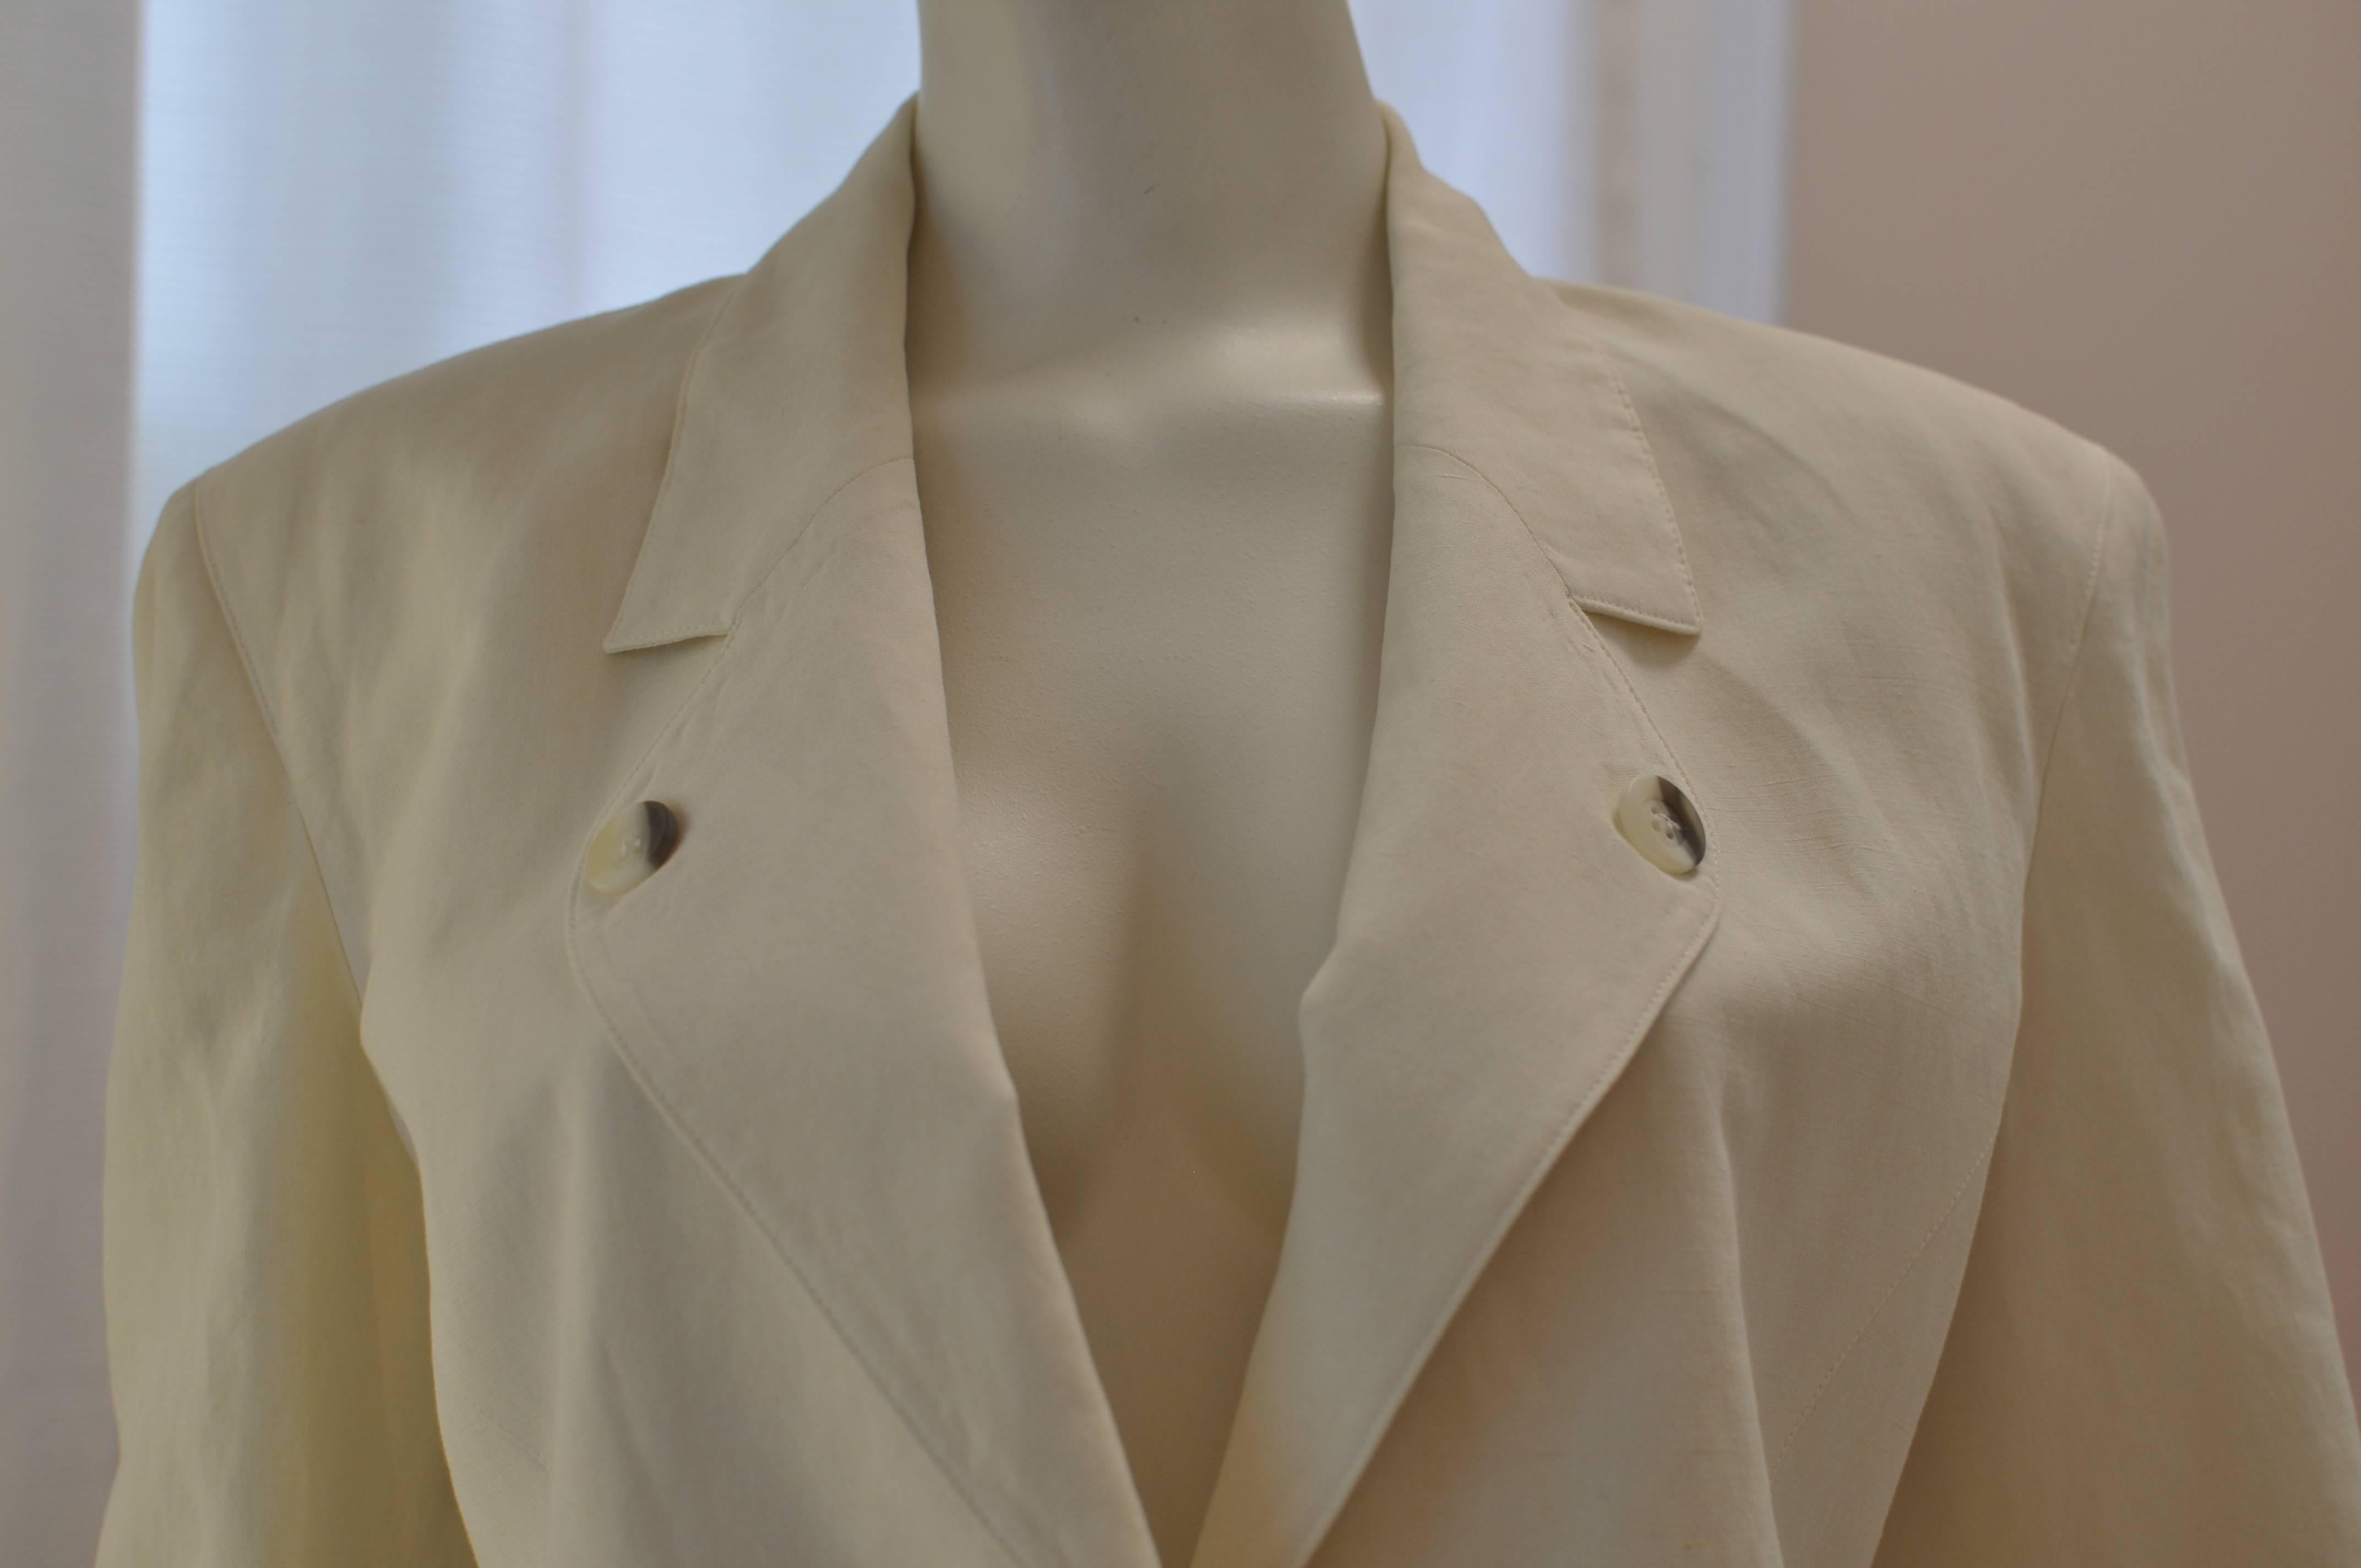 This tuxedo style jacket is made of a linen blend and has a notched lapel with a button each side; a one button closure; two slit pockets which have not yet been used, and 3 buttons on each cuff.